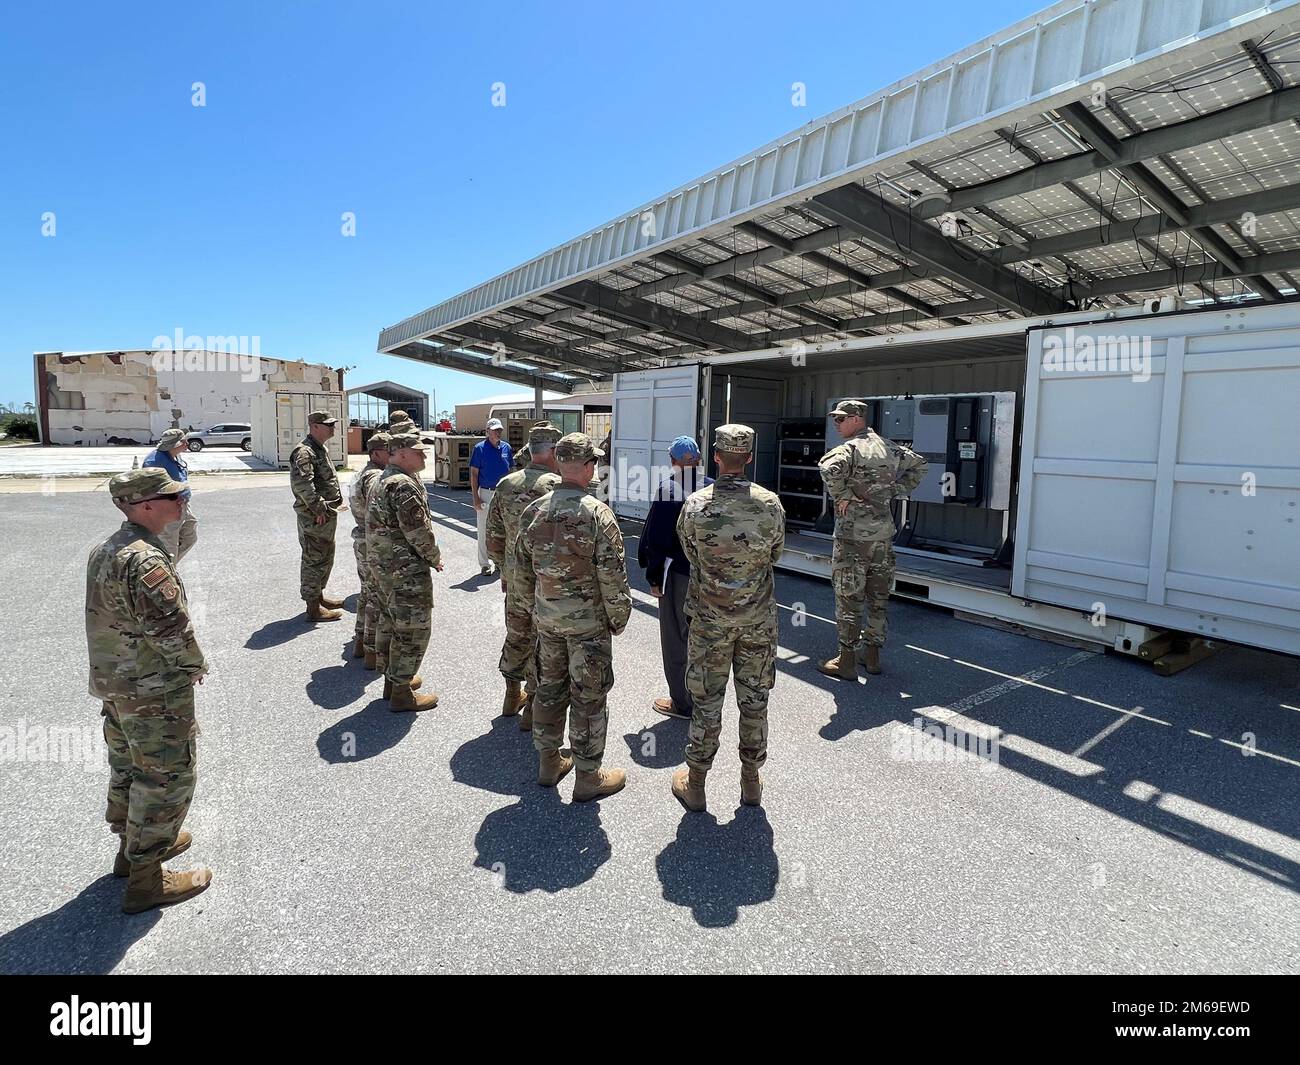 Maj. Gen. John Allen, Air Force Civil Engineer Center commander, and other leaders looks on as AFCEC Engineer Reza Salavani describes the Solar Carport during a visit to the 9700 Area at Tyndall Air Force Base, Florida, on April 20, 2022. Constructed in 2010, the carport was funded by the Air Force Research Lab-Advanced Power Technology Office. The steel structure proved its strength in 2018 when, following a direct hit by the Category 5 storm Hurricane Michael,133 of its 140 panels remained intact. The system currently provides power for a variety of things including tools, test equipment and Stock Photo